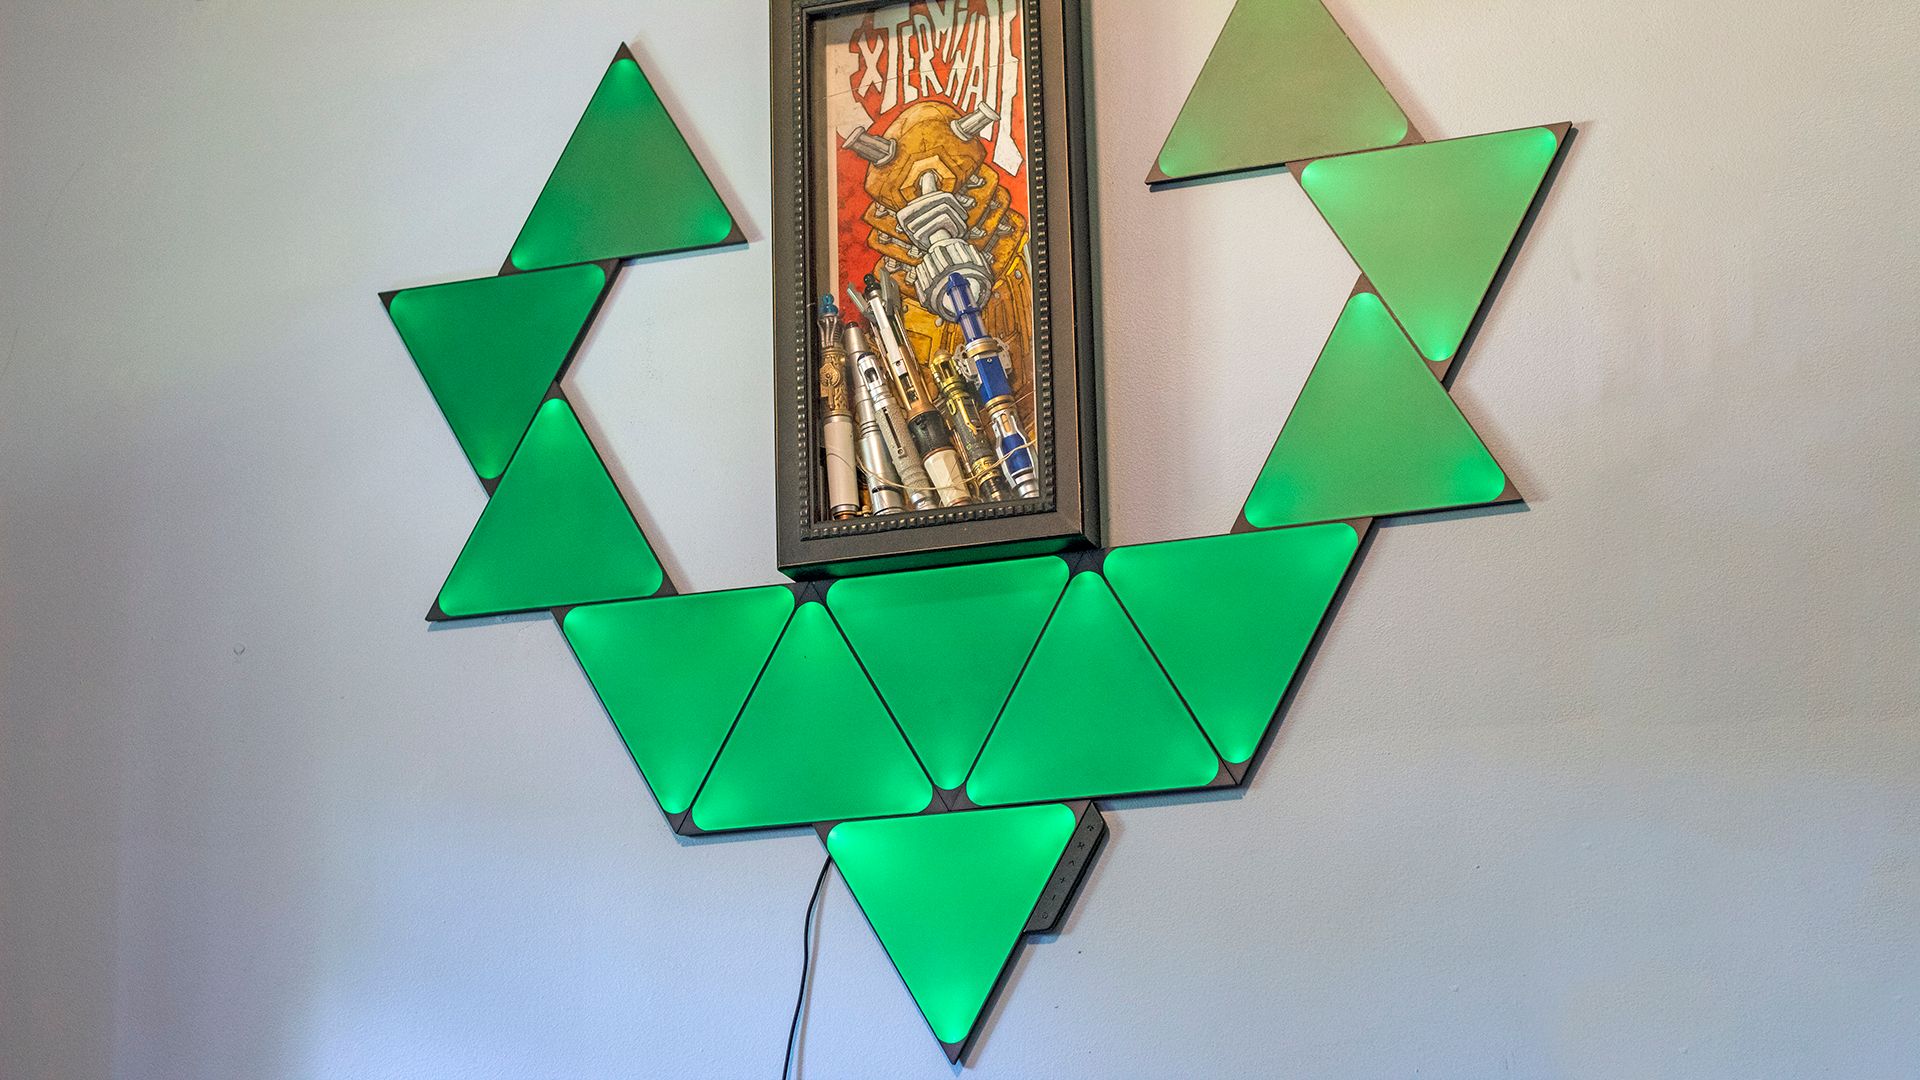 A set of triangles on the wall, glowing green